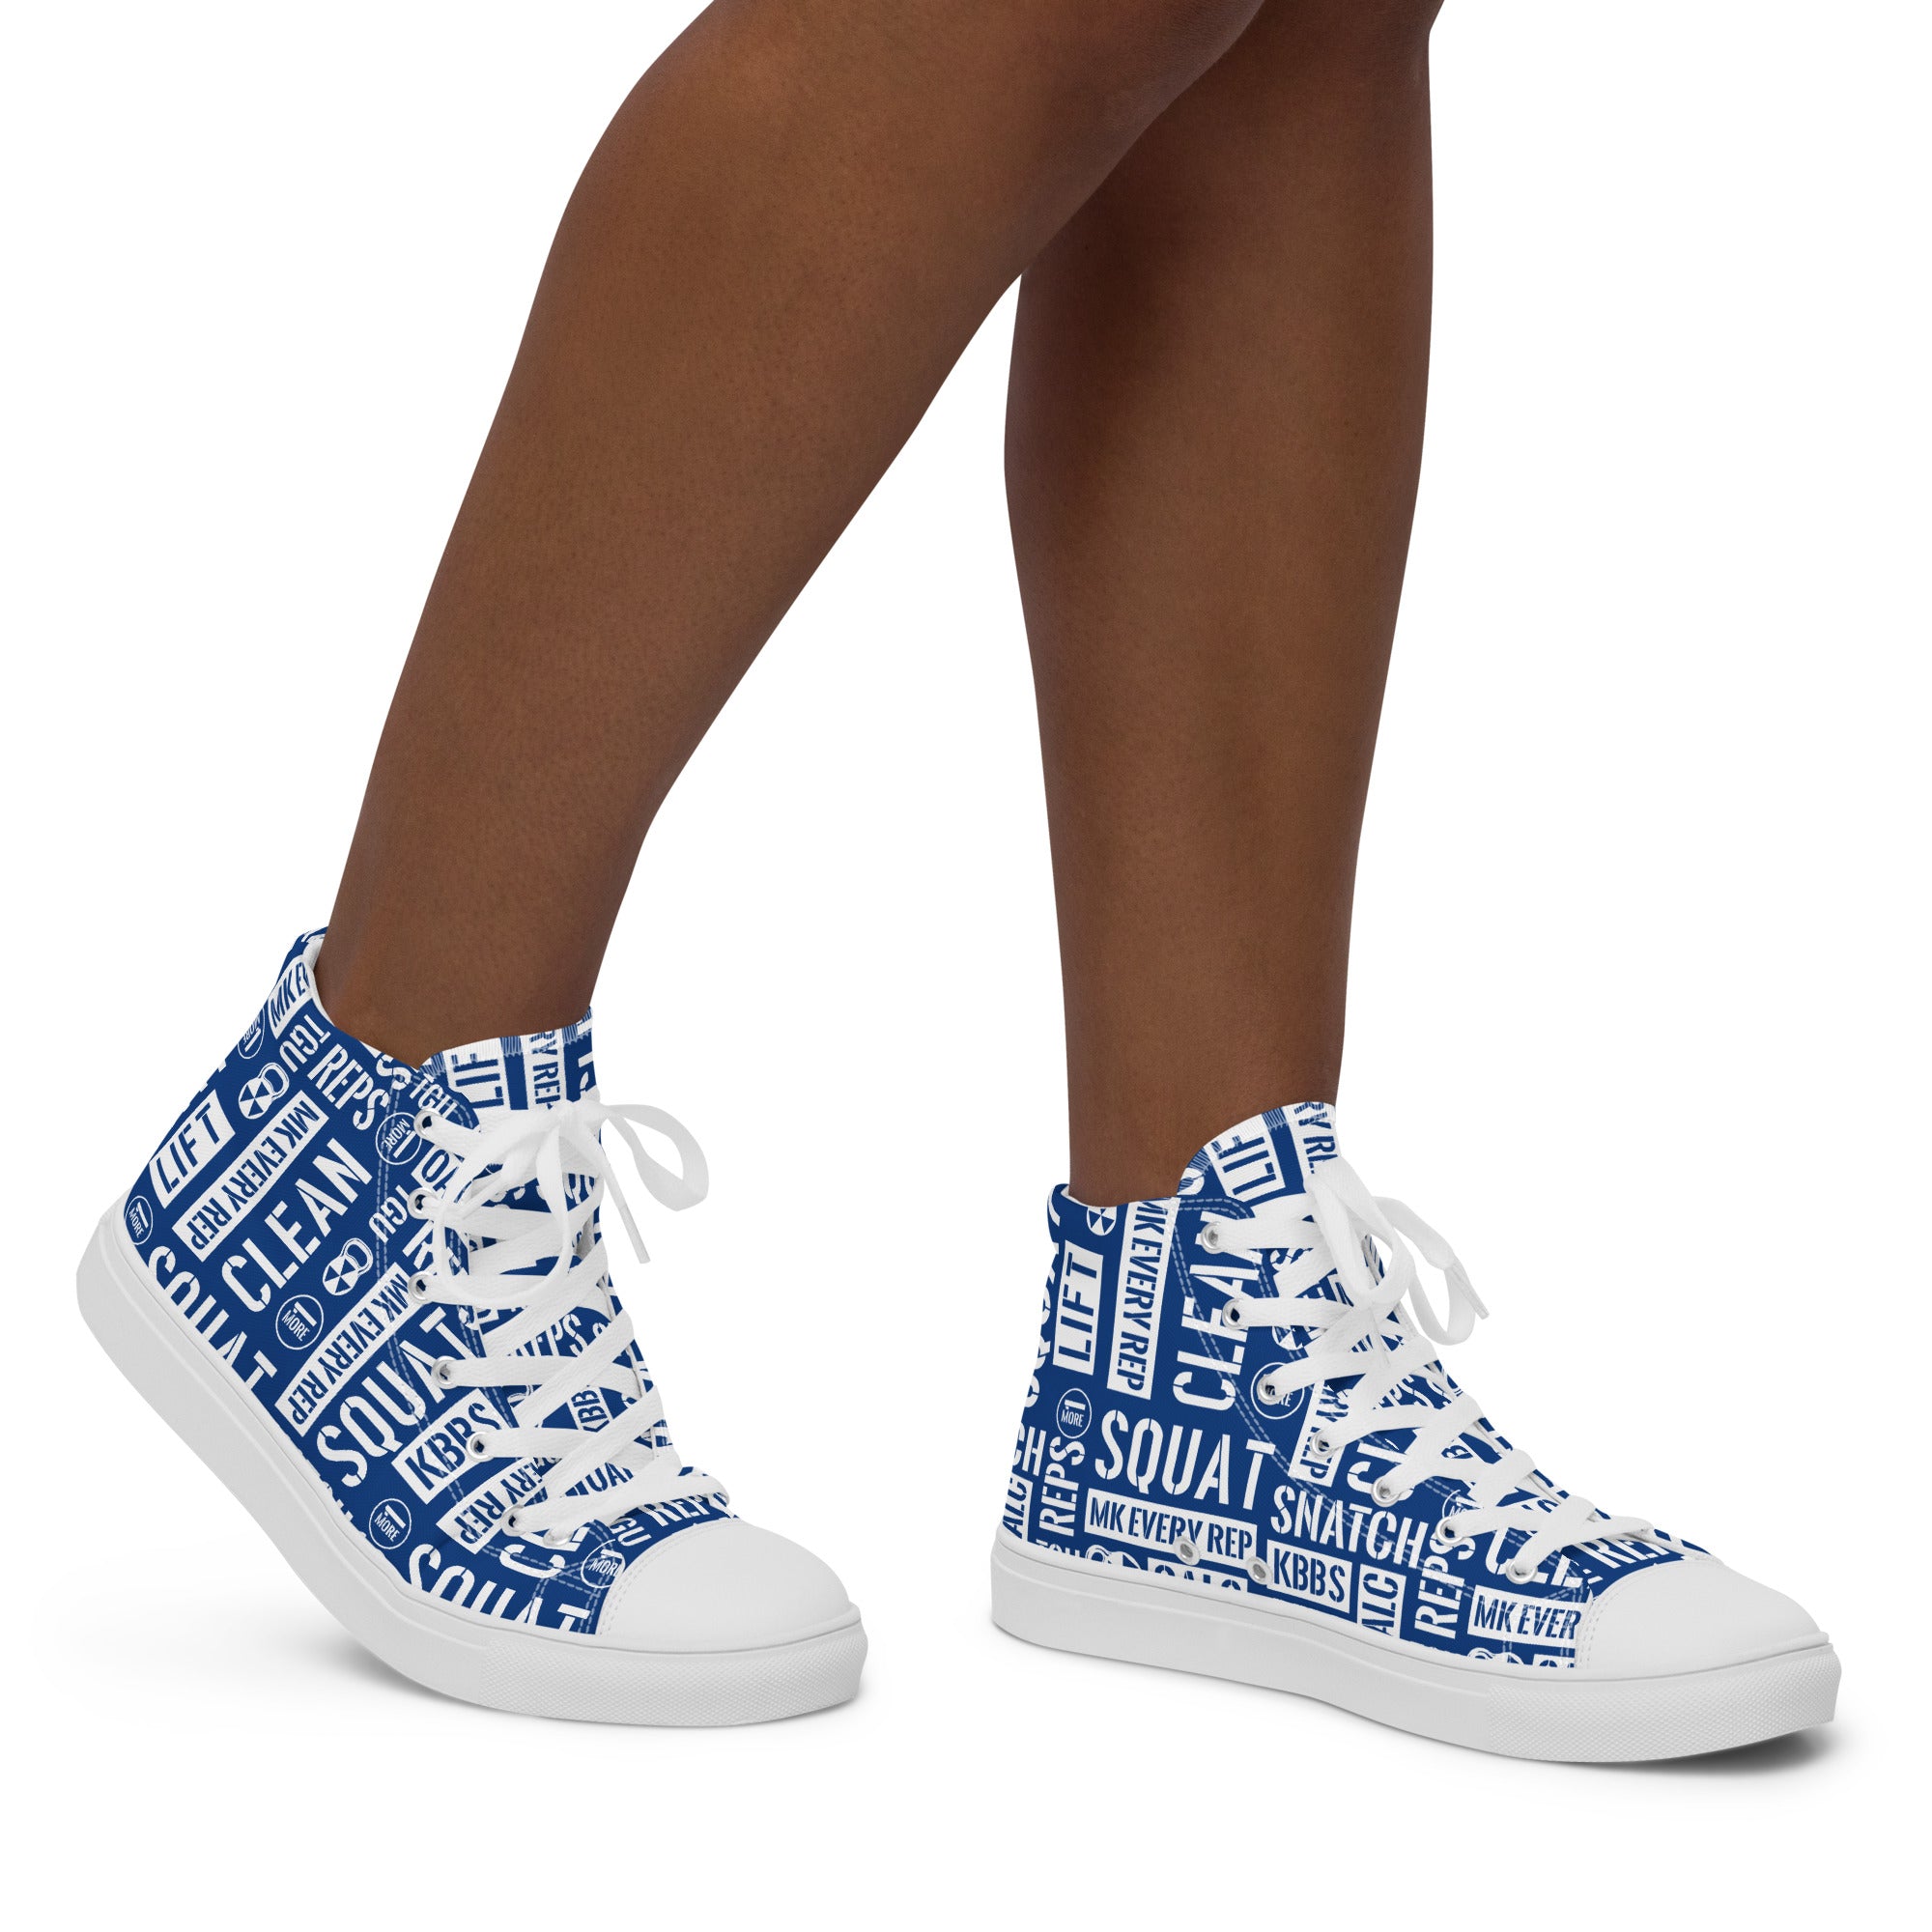 Blue/White Acronyms Women’s High Tops